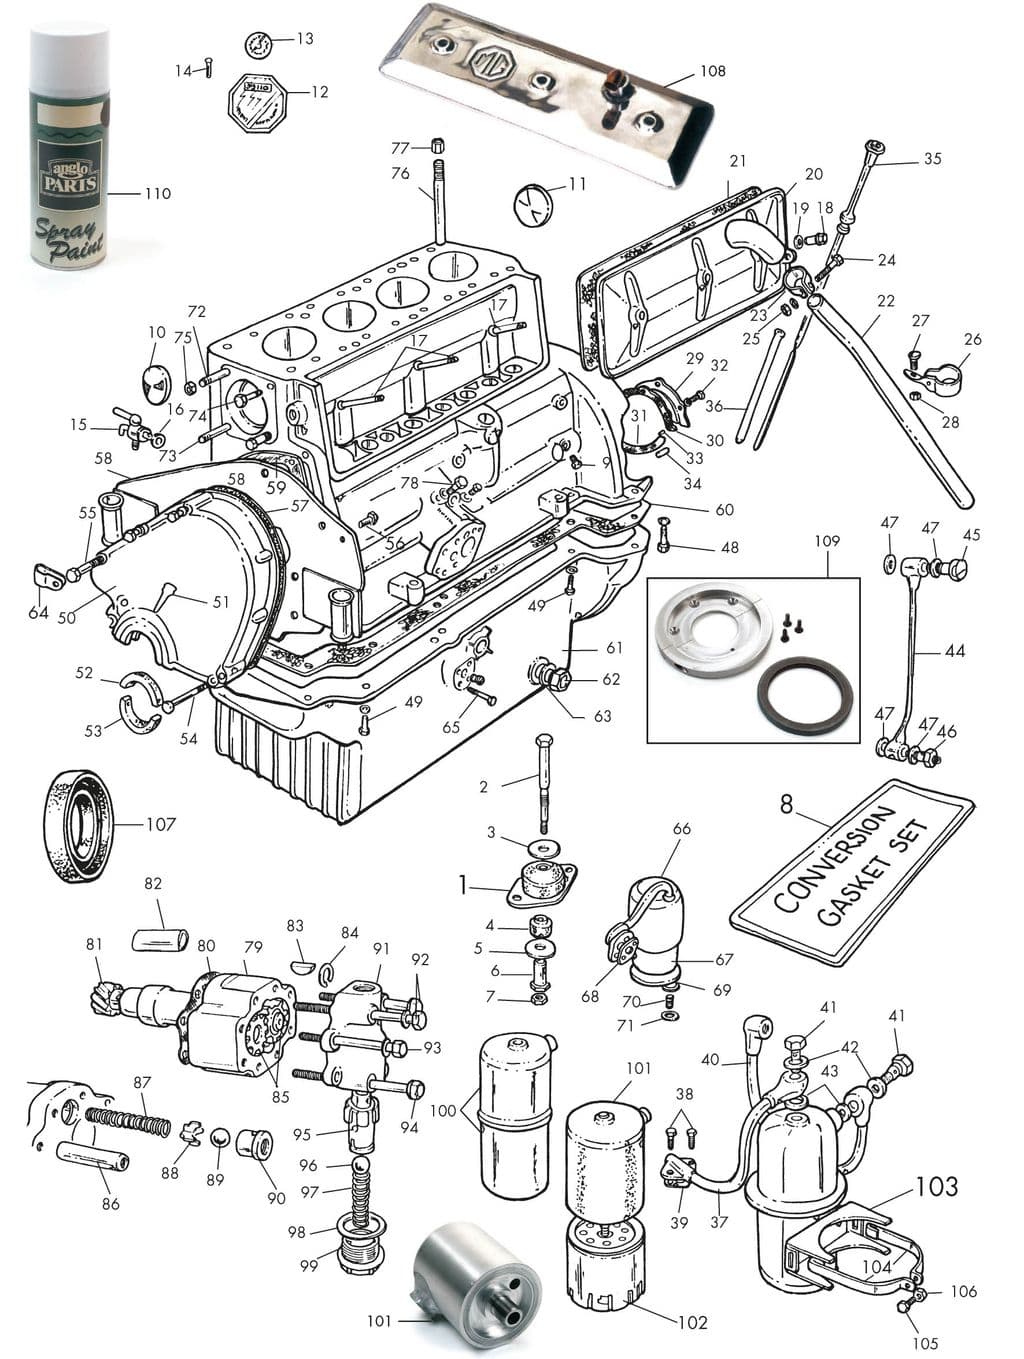 MGTC 1945-1949 - Oil filters | Webshop Anglo Parts - Engine block & oil system - 1